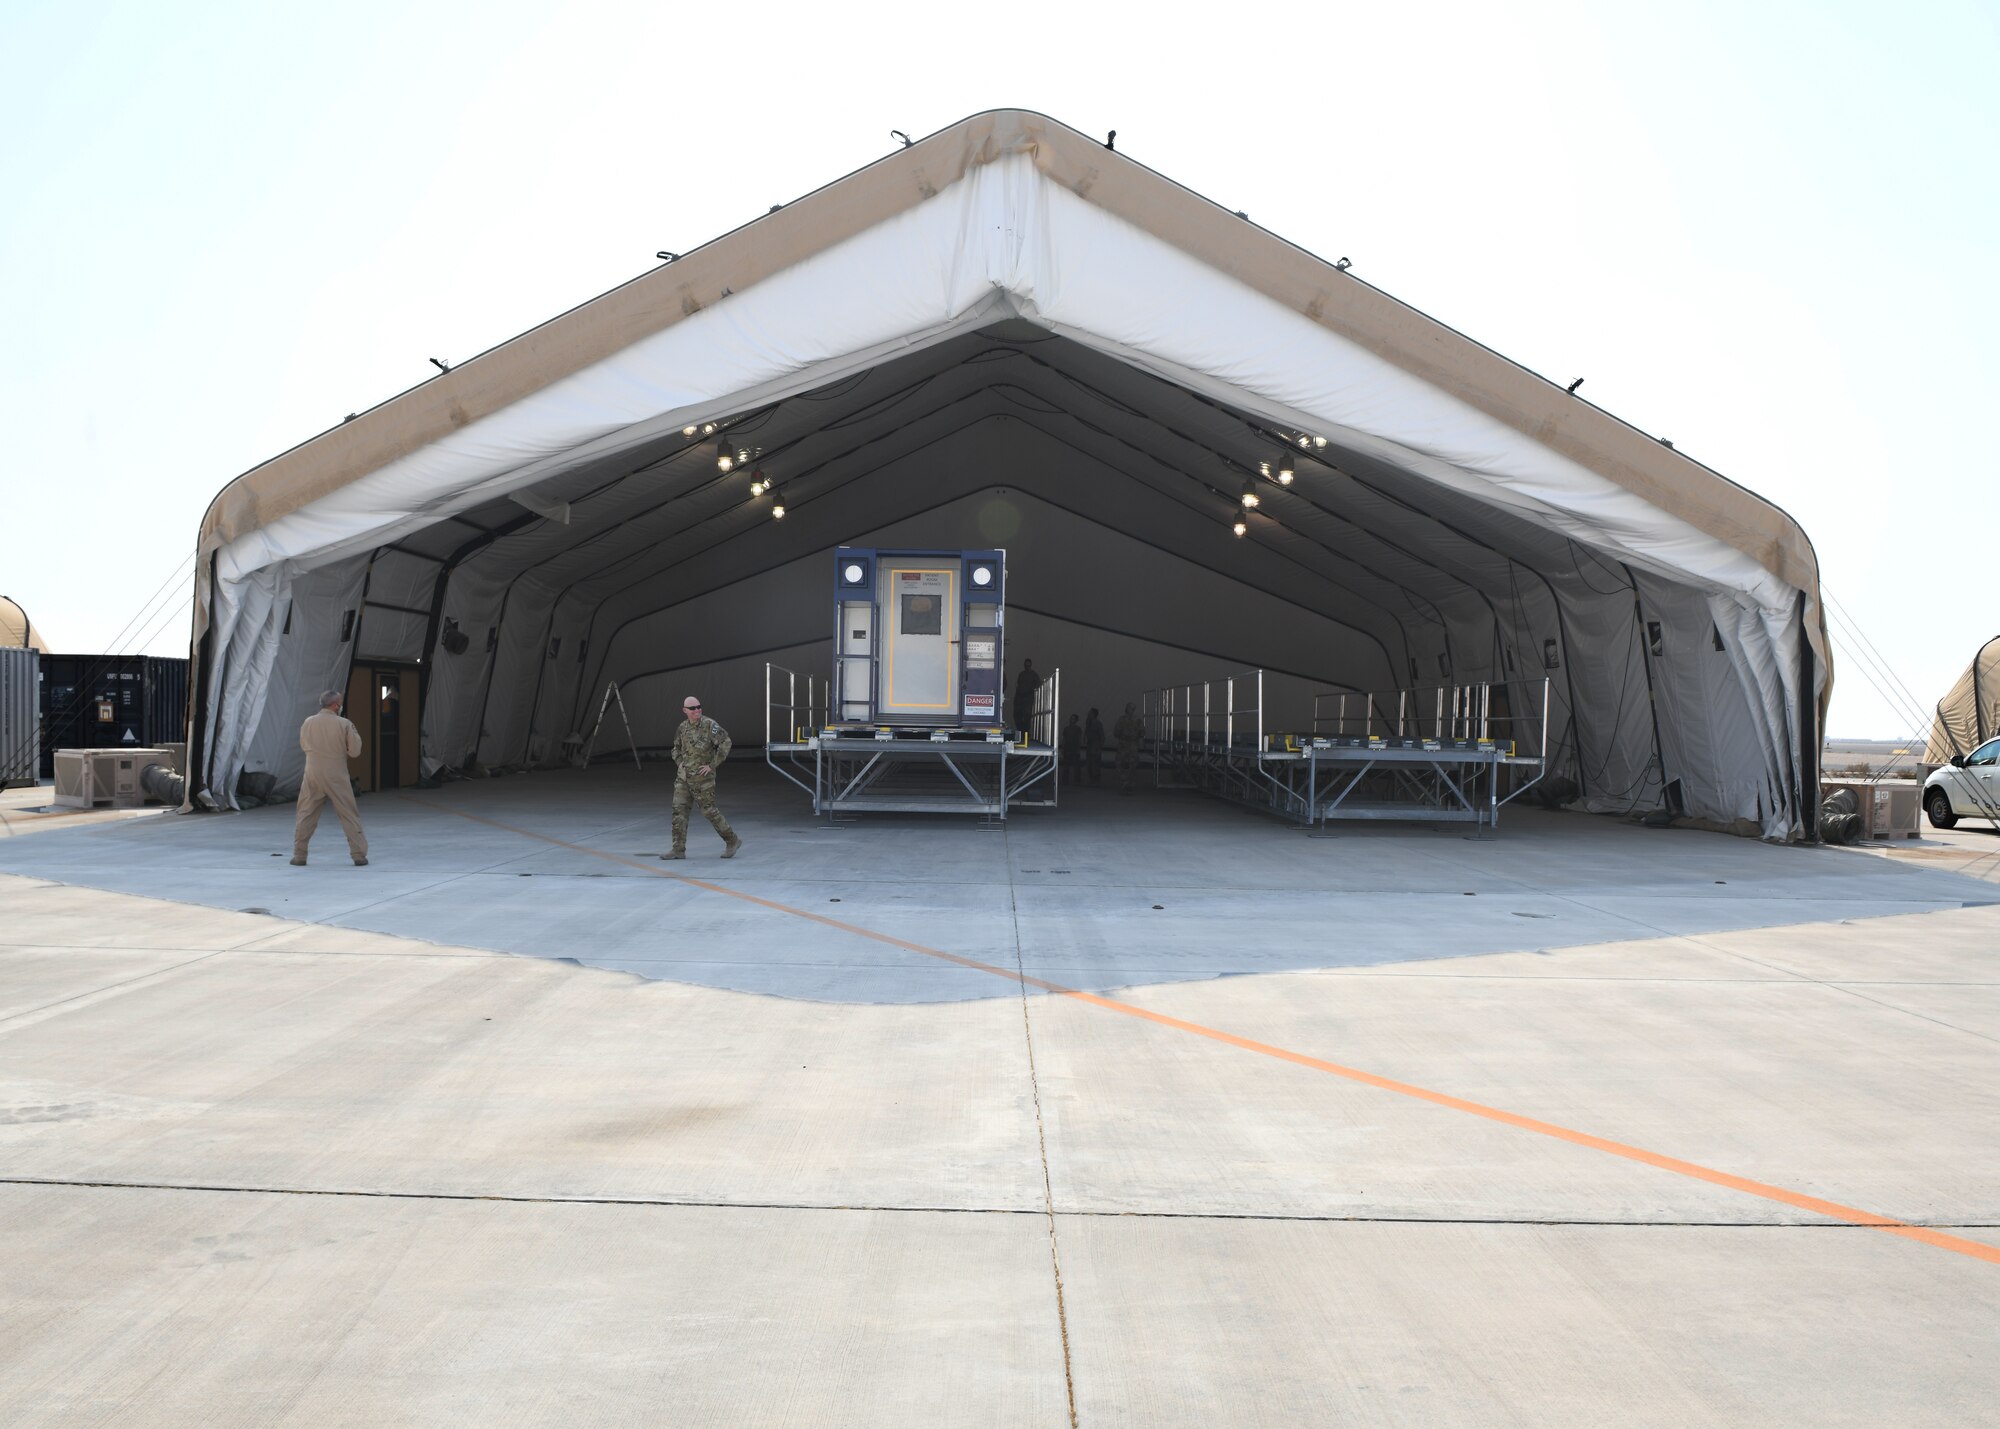 A specialized medical container designed to transport individuals with infectious diseases sits in a clamshell hangar on the flight line of Al Udeid Air Base, Qatar, on Sept. 18, 2020. The Negatively Pressurized Conex, or NPC, is configured for the C-17 Globemaster III and C-5 Super Galaxy aircraft to safely transport up to 28 passengers or 23 patients, including ambulatory and litter, around the globe. (U.S. Air Force photo by Staff Sgt. Kayla White)